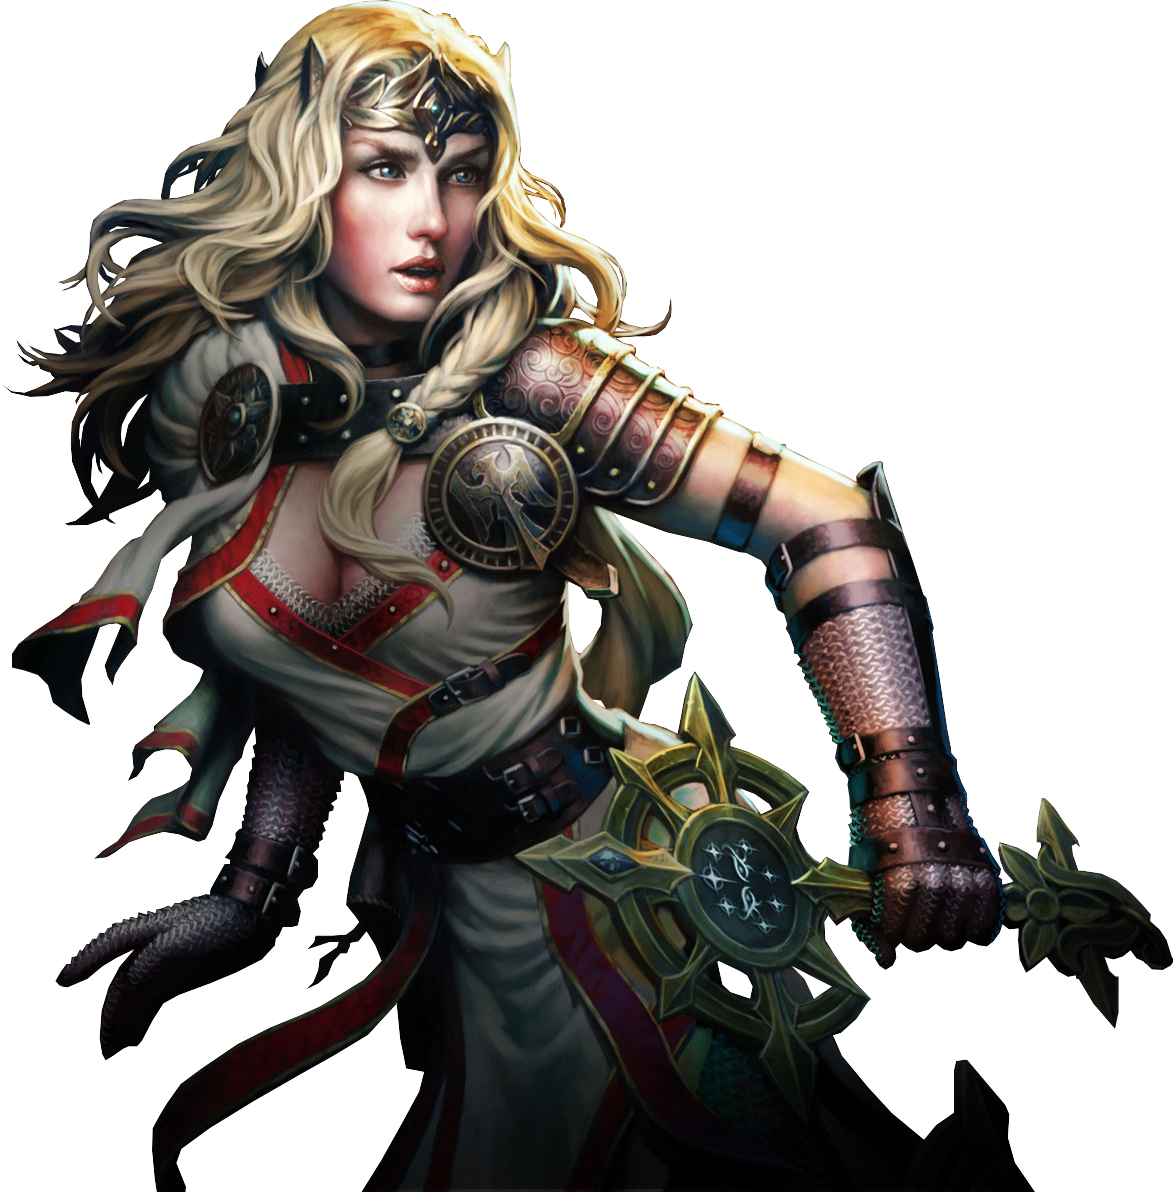 neverwinter_cleric_render_by_animeosoroshii-d6385uc.png